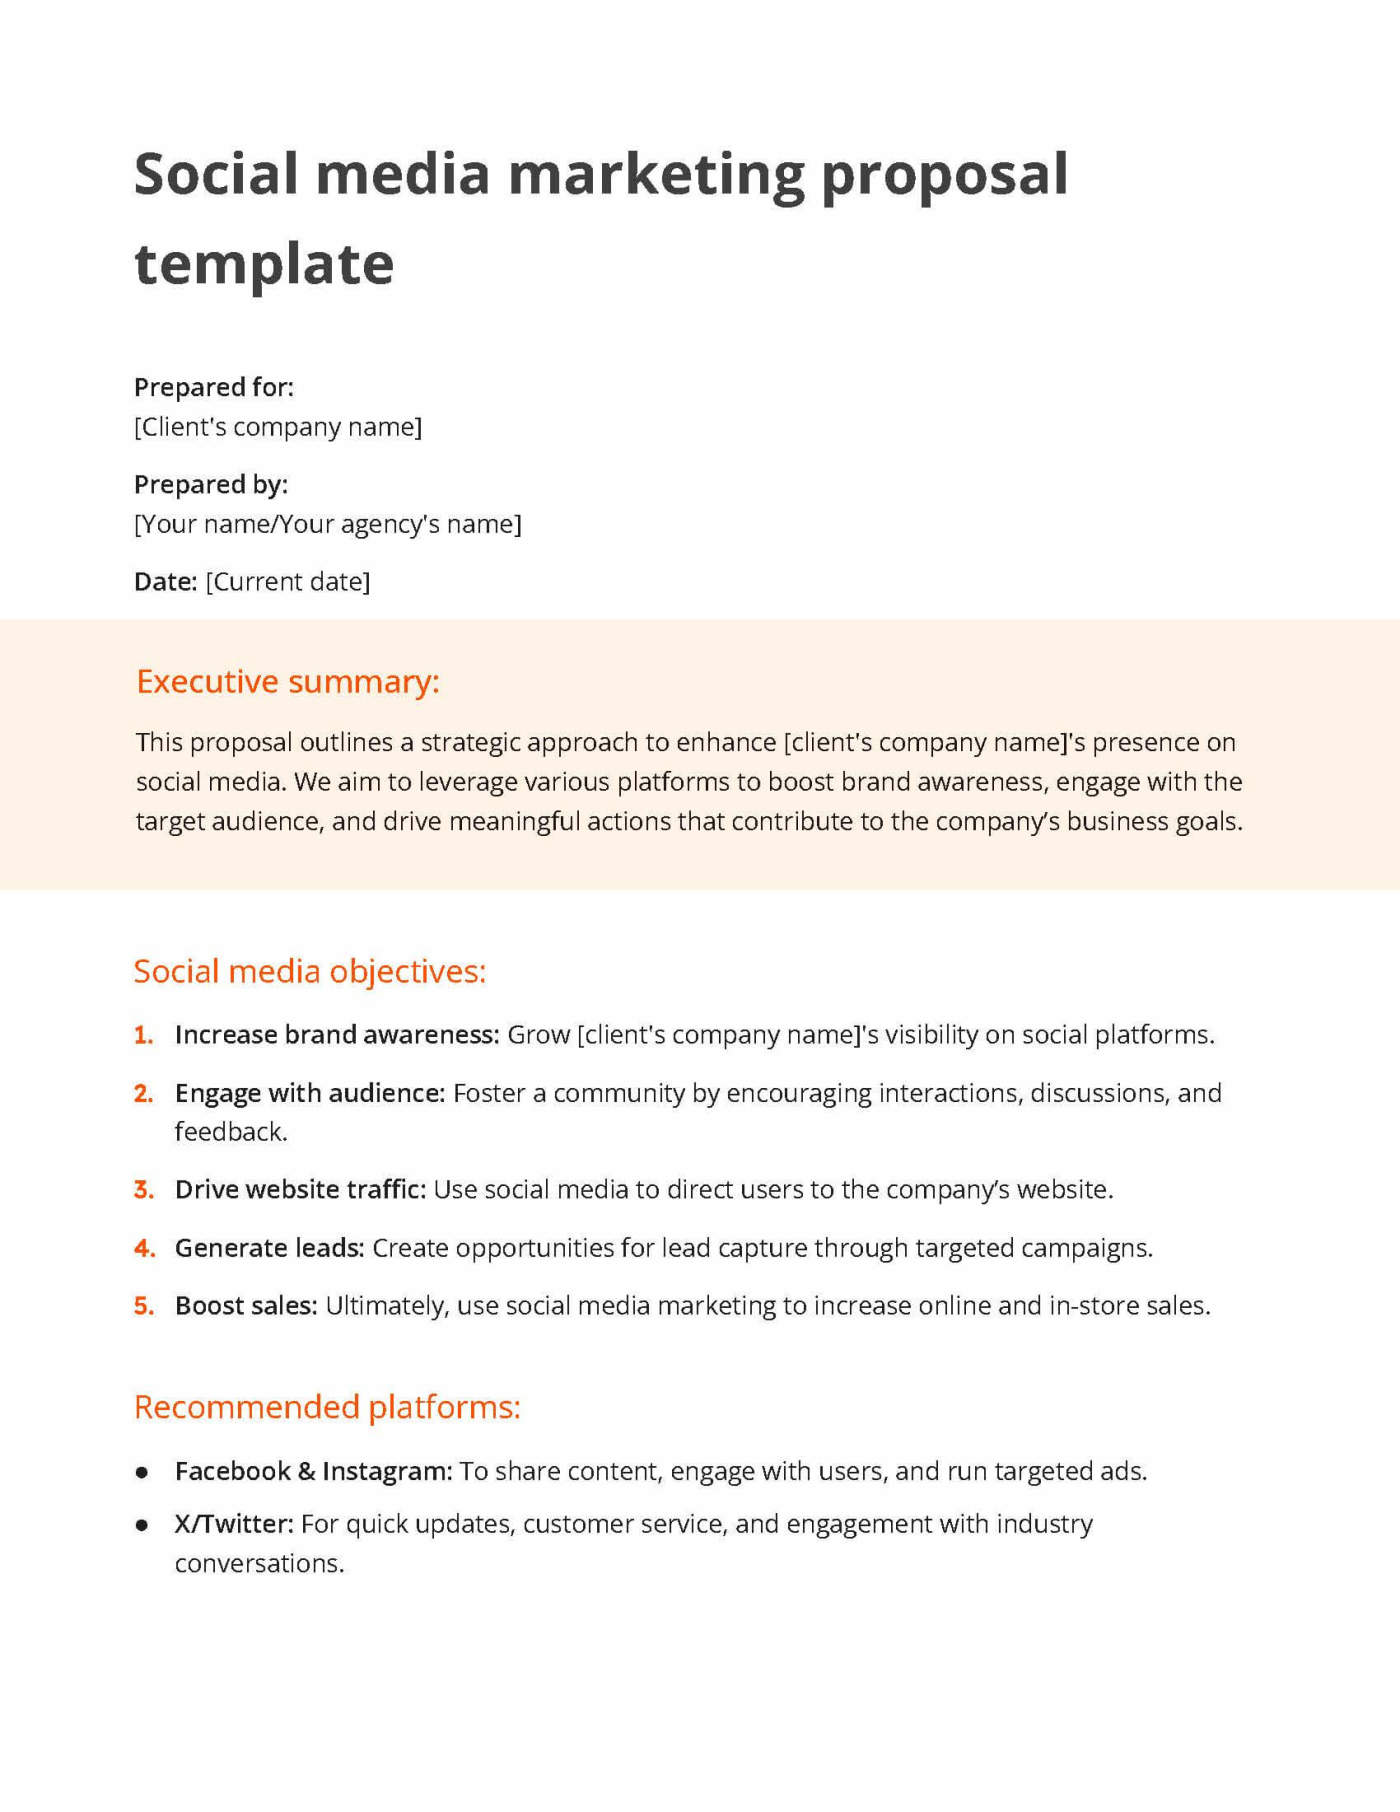 White and orange social media proposal template including a section for social media objectives and recommended platforms 